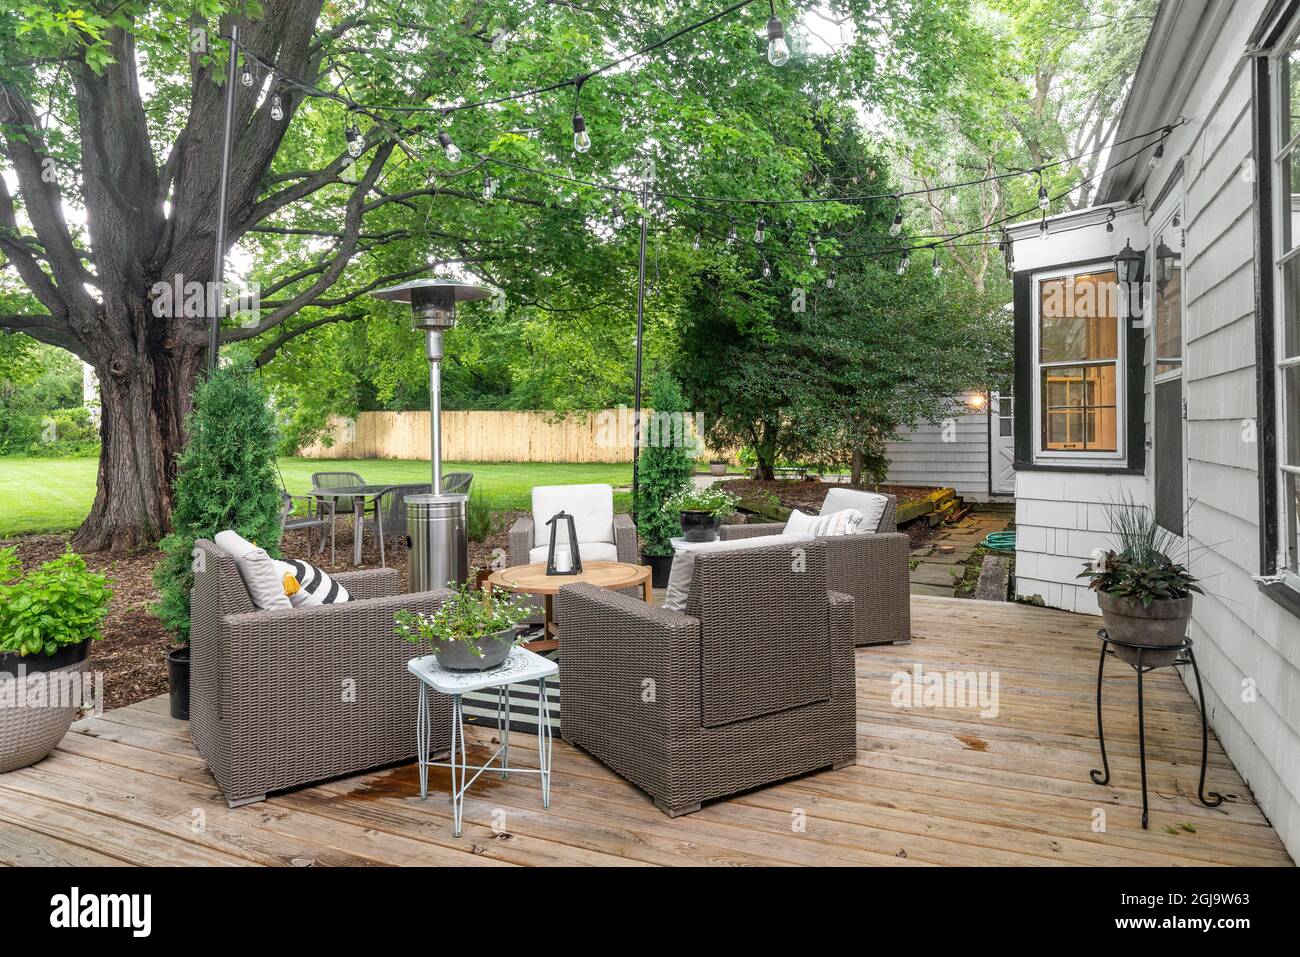 A cozy backyard patio of a white farmhouse with furniture, string lights, and wooden deck. Stock Photo